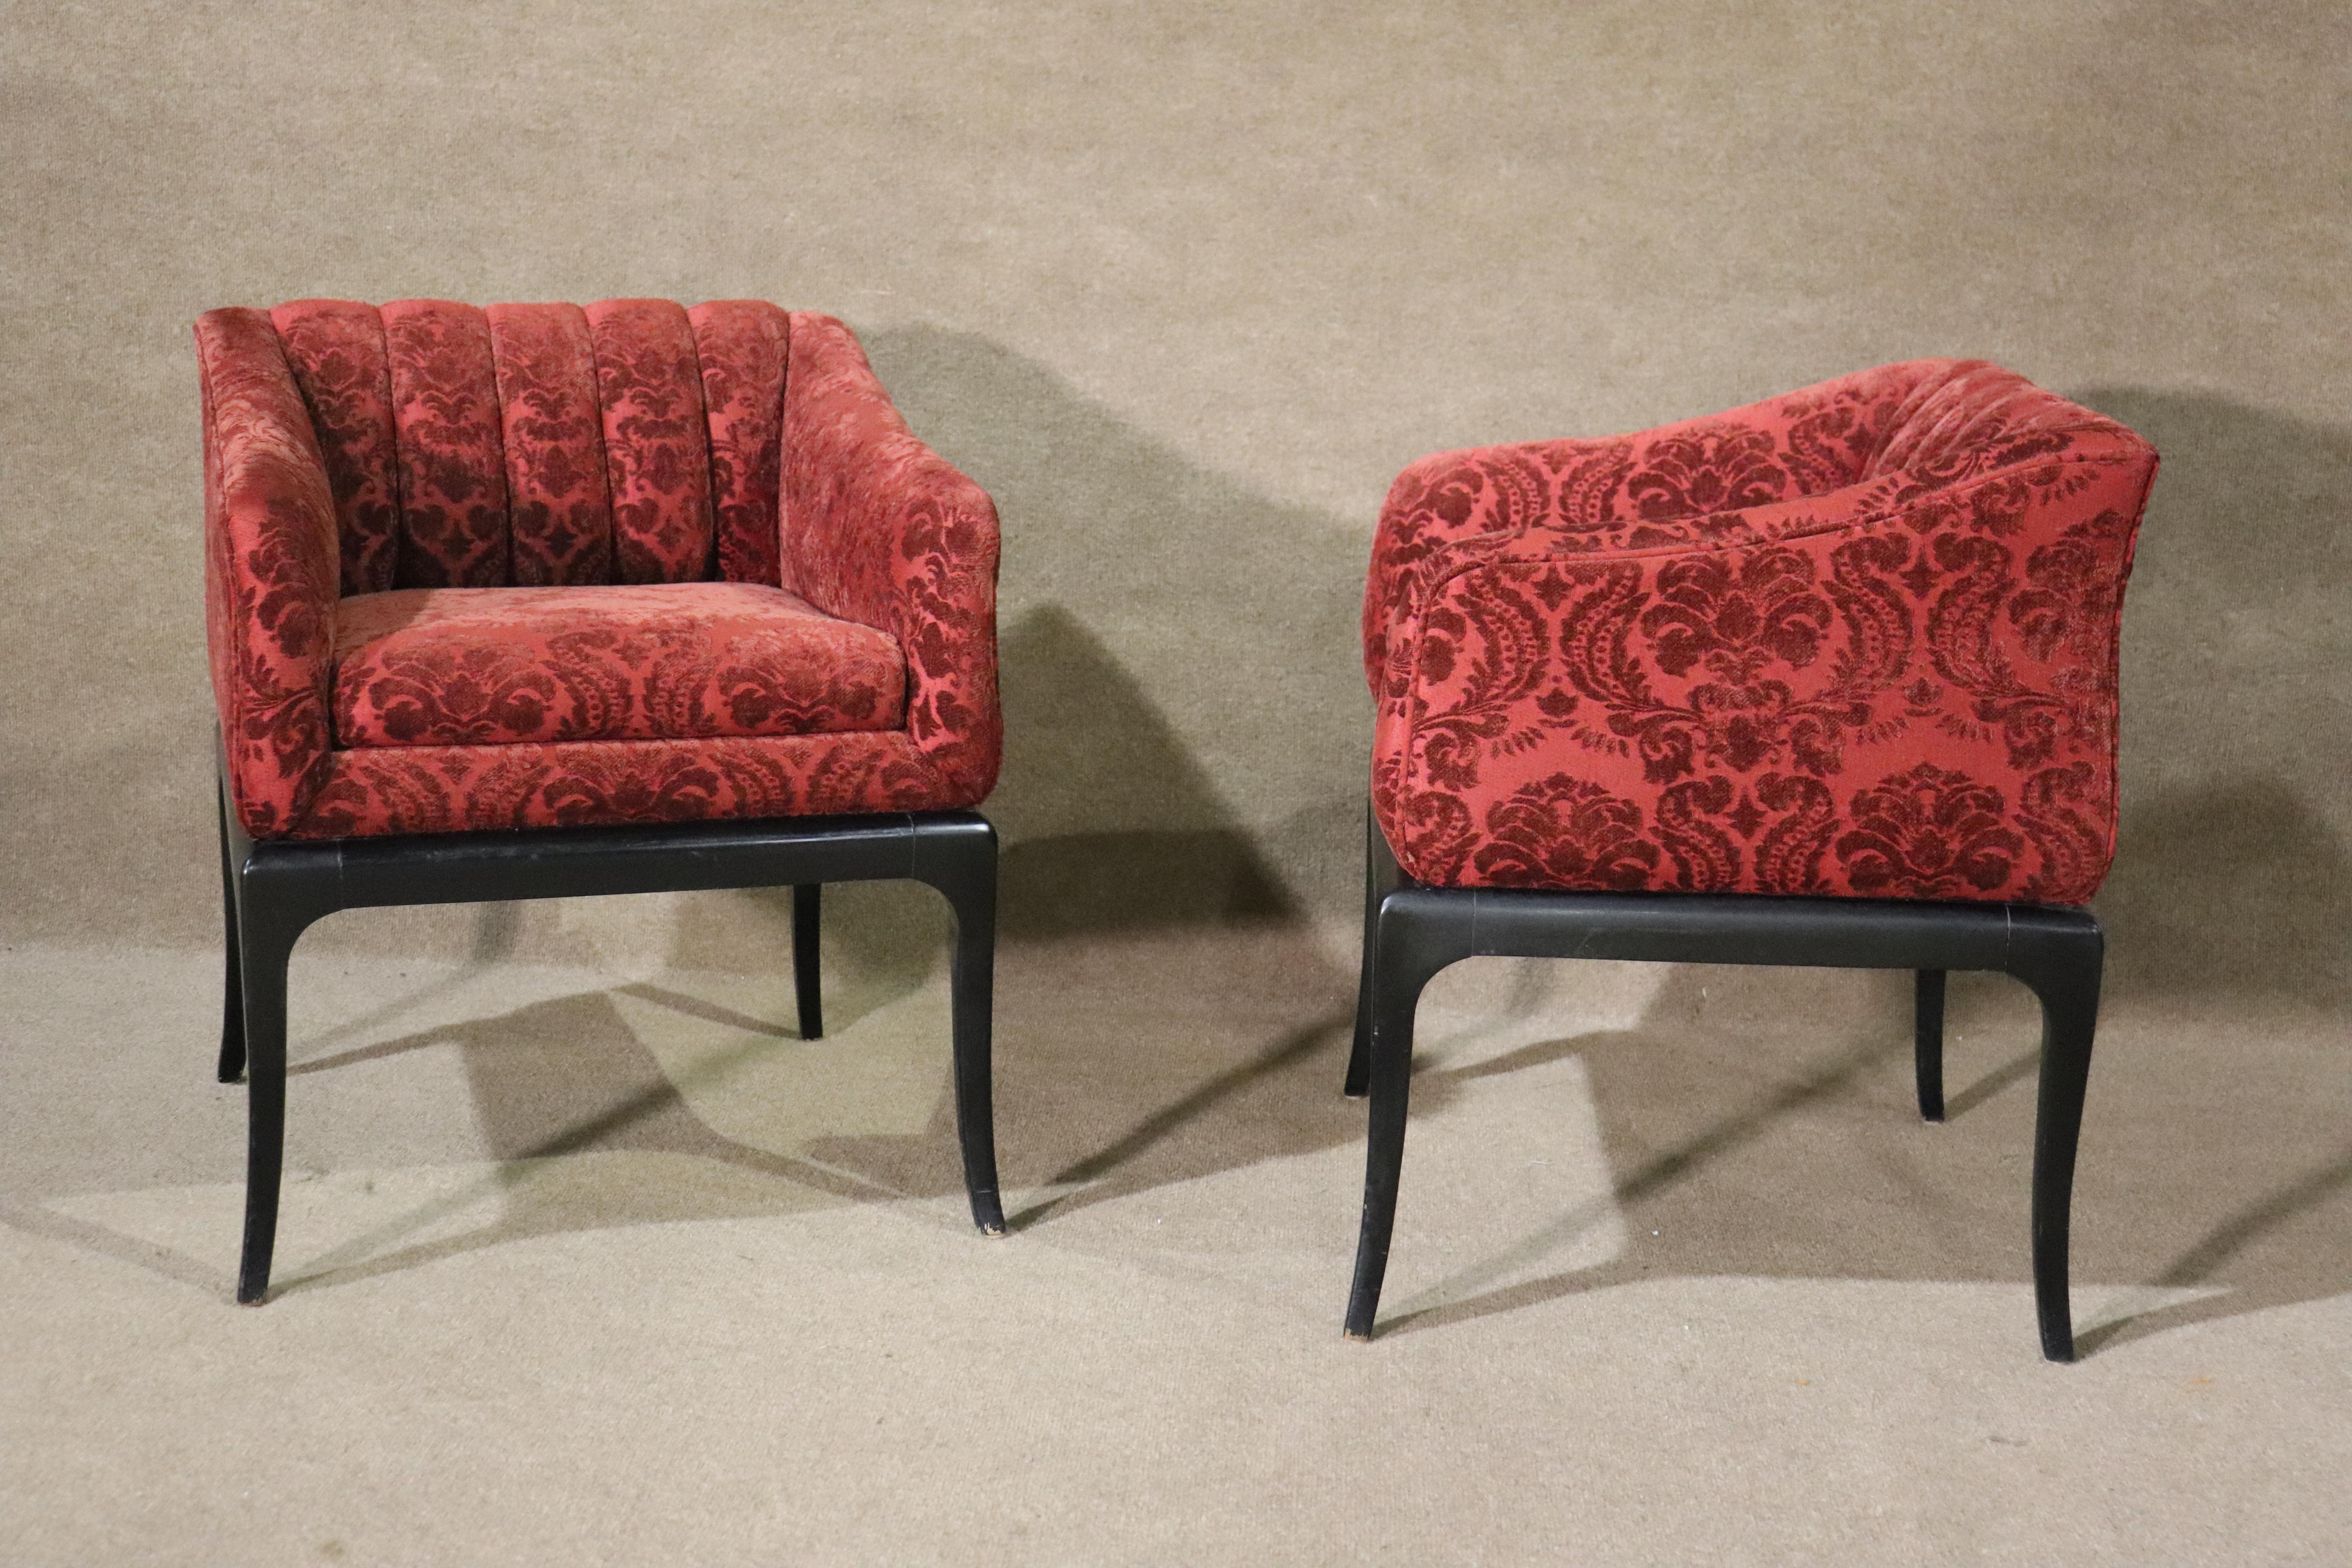 Pair of deco style side chairs in patterned red upholstery on ebonized base. 
Please confirm location NY or NJ